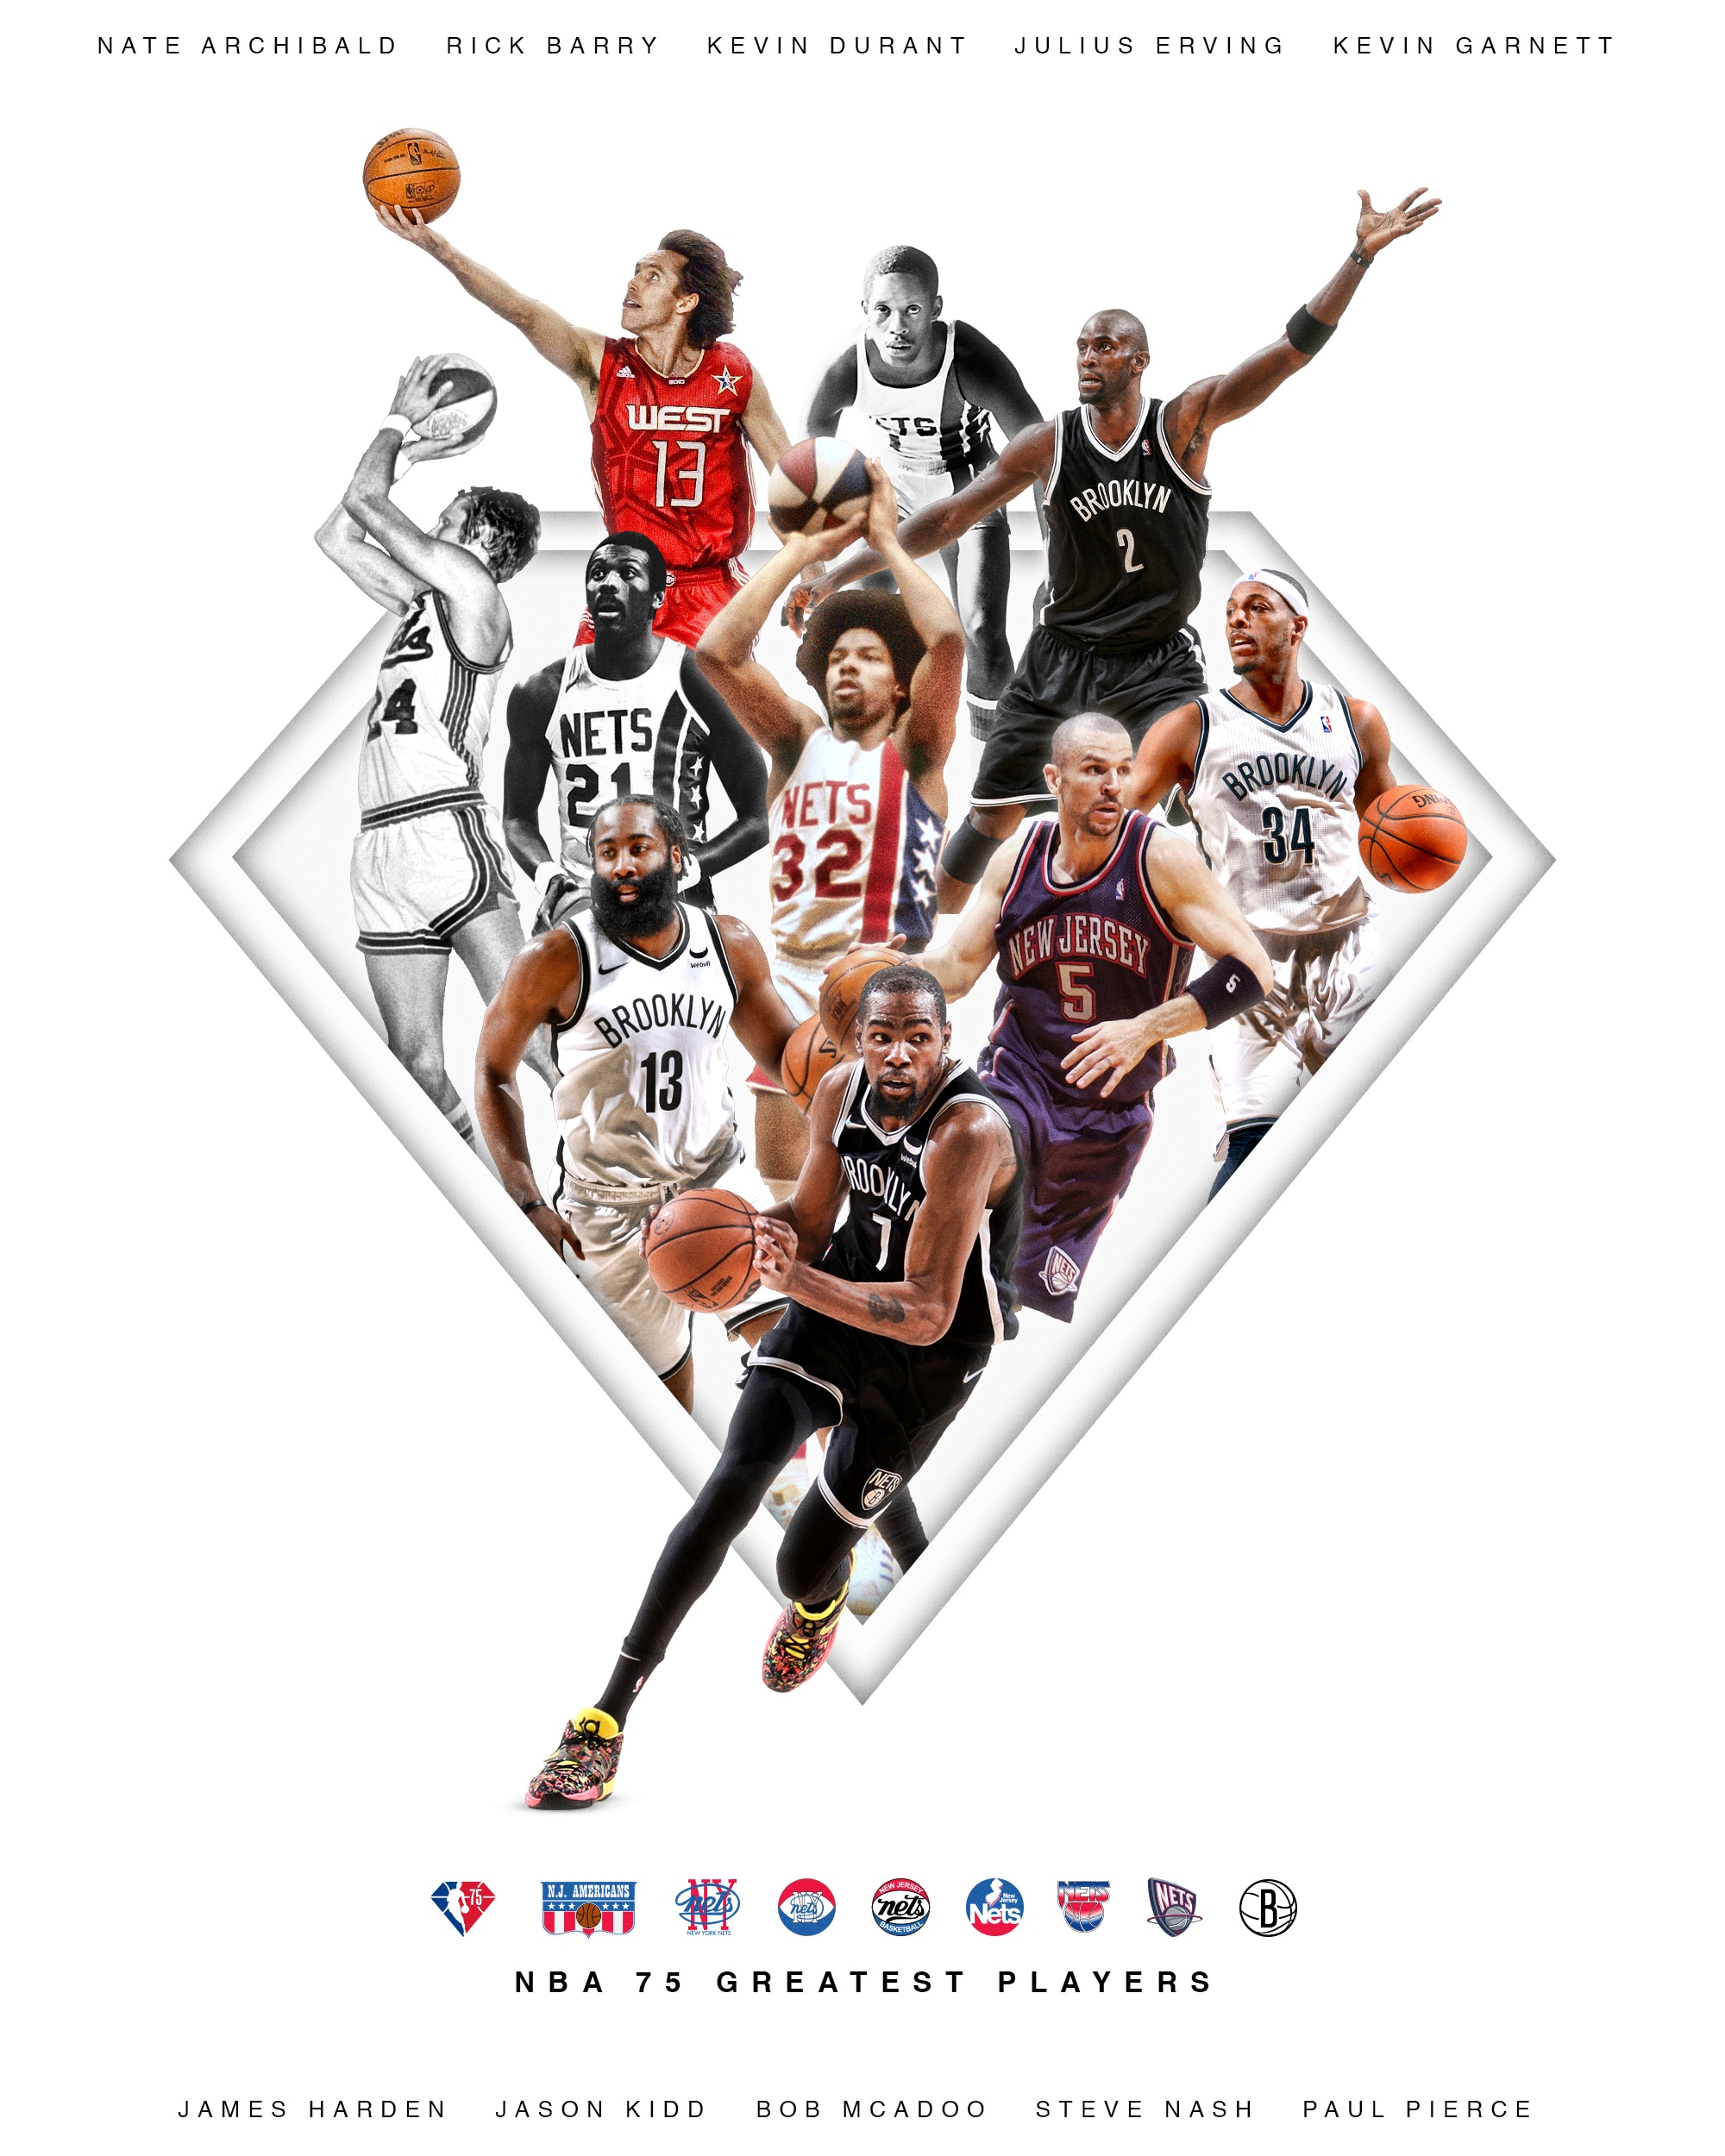 Kevin Durant, James Harden, and Nets Greats Among Selections for NBA 75th Anniversary Team